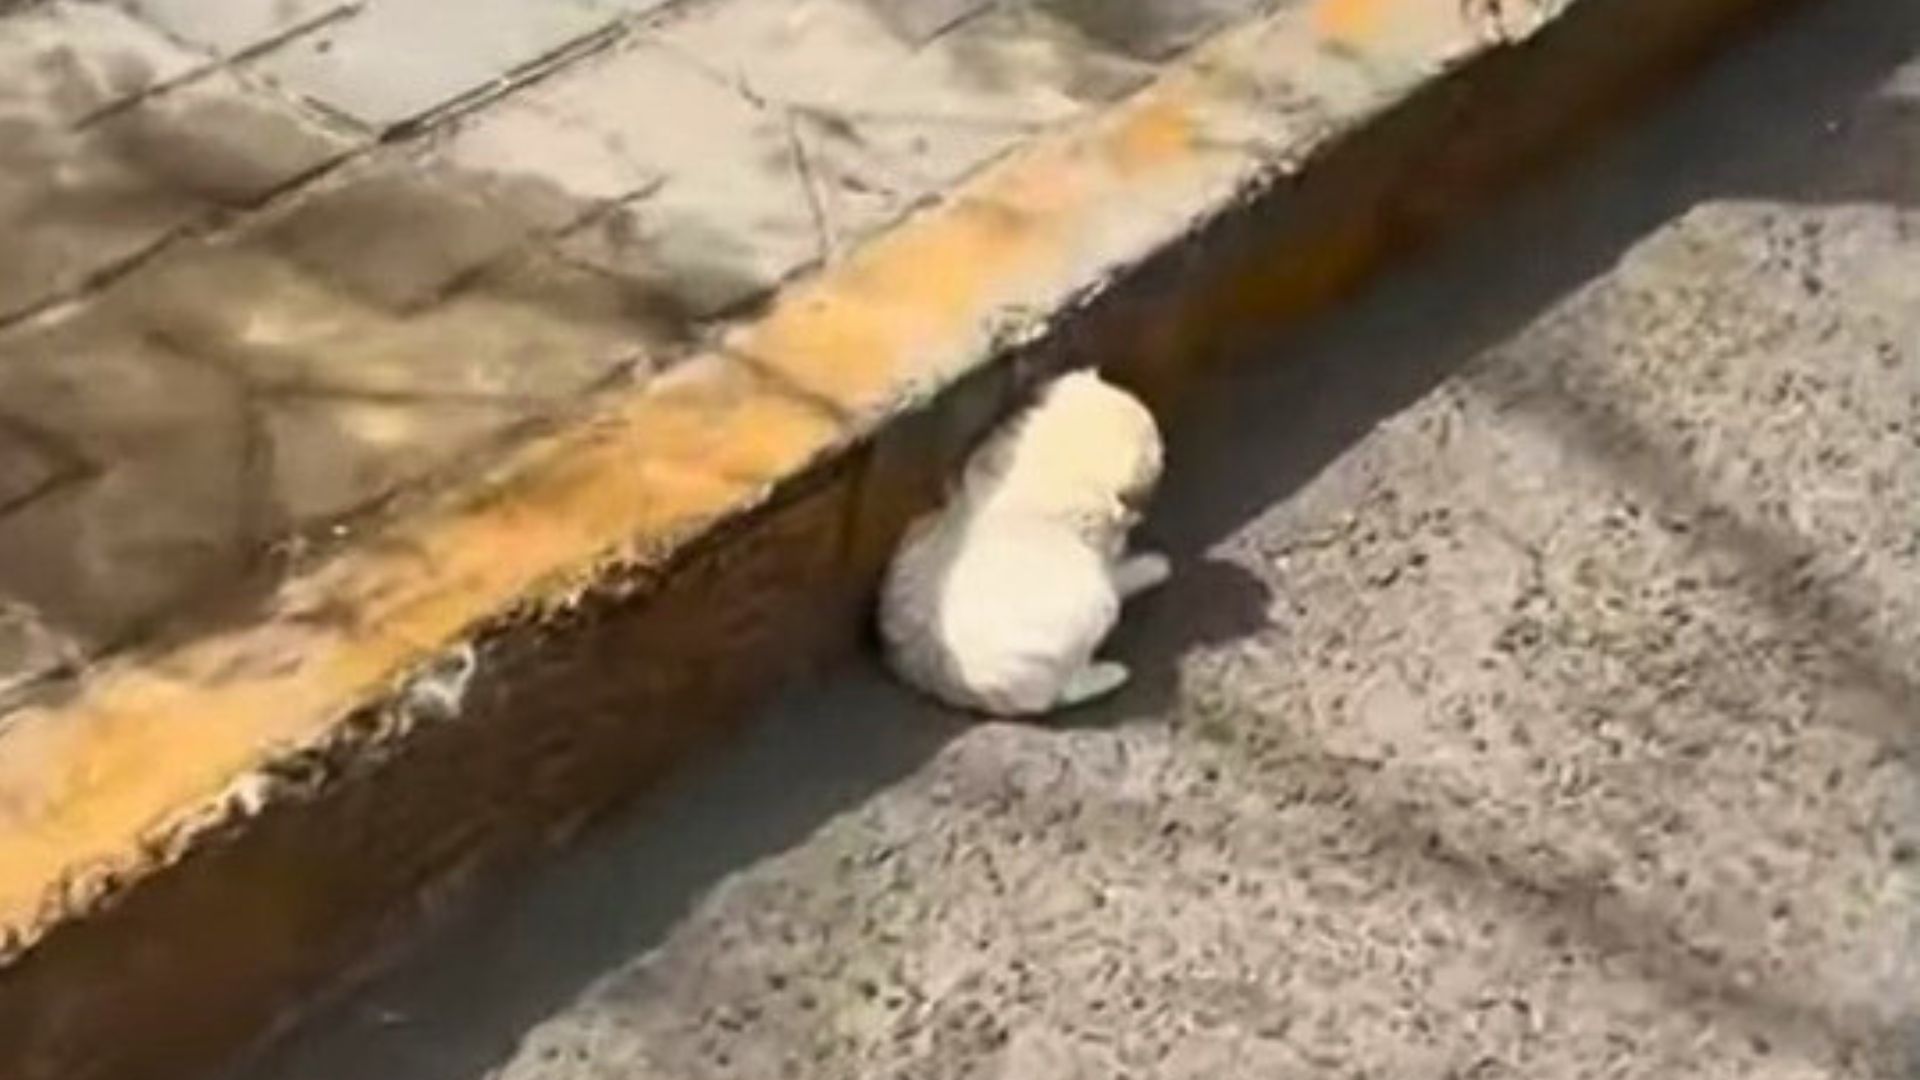 Man Driving On A Busy Road Notices A White Fluff Desperately Trying To Find Shelter From The Summer Sun